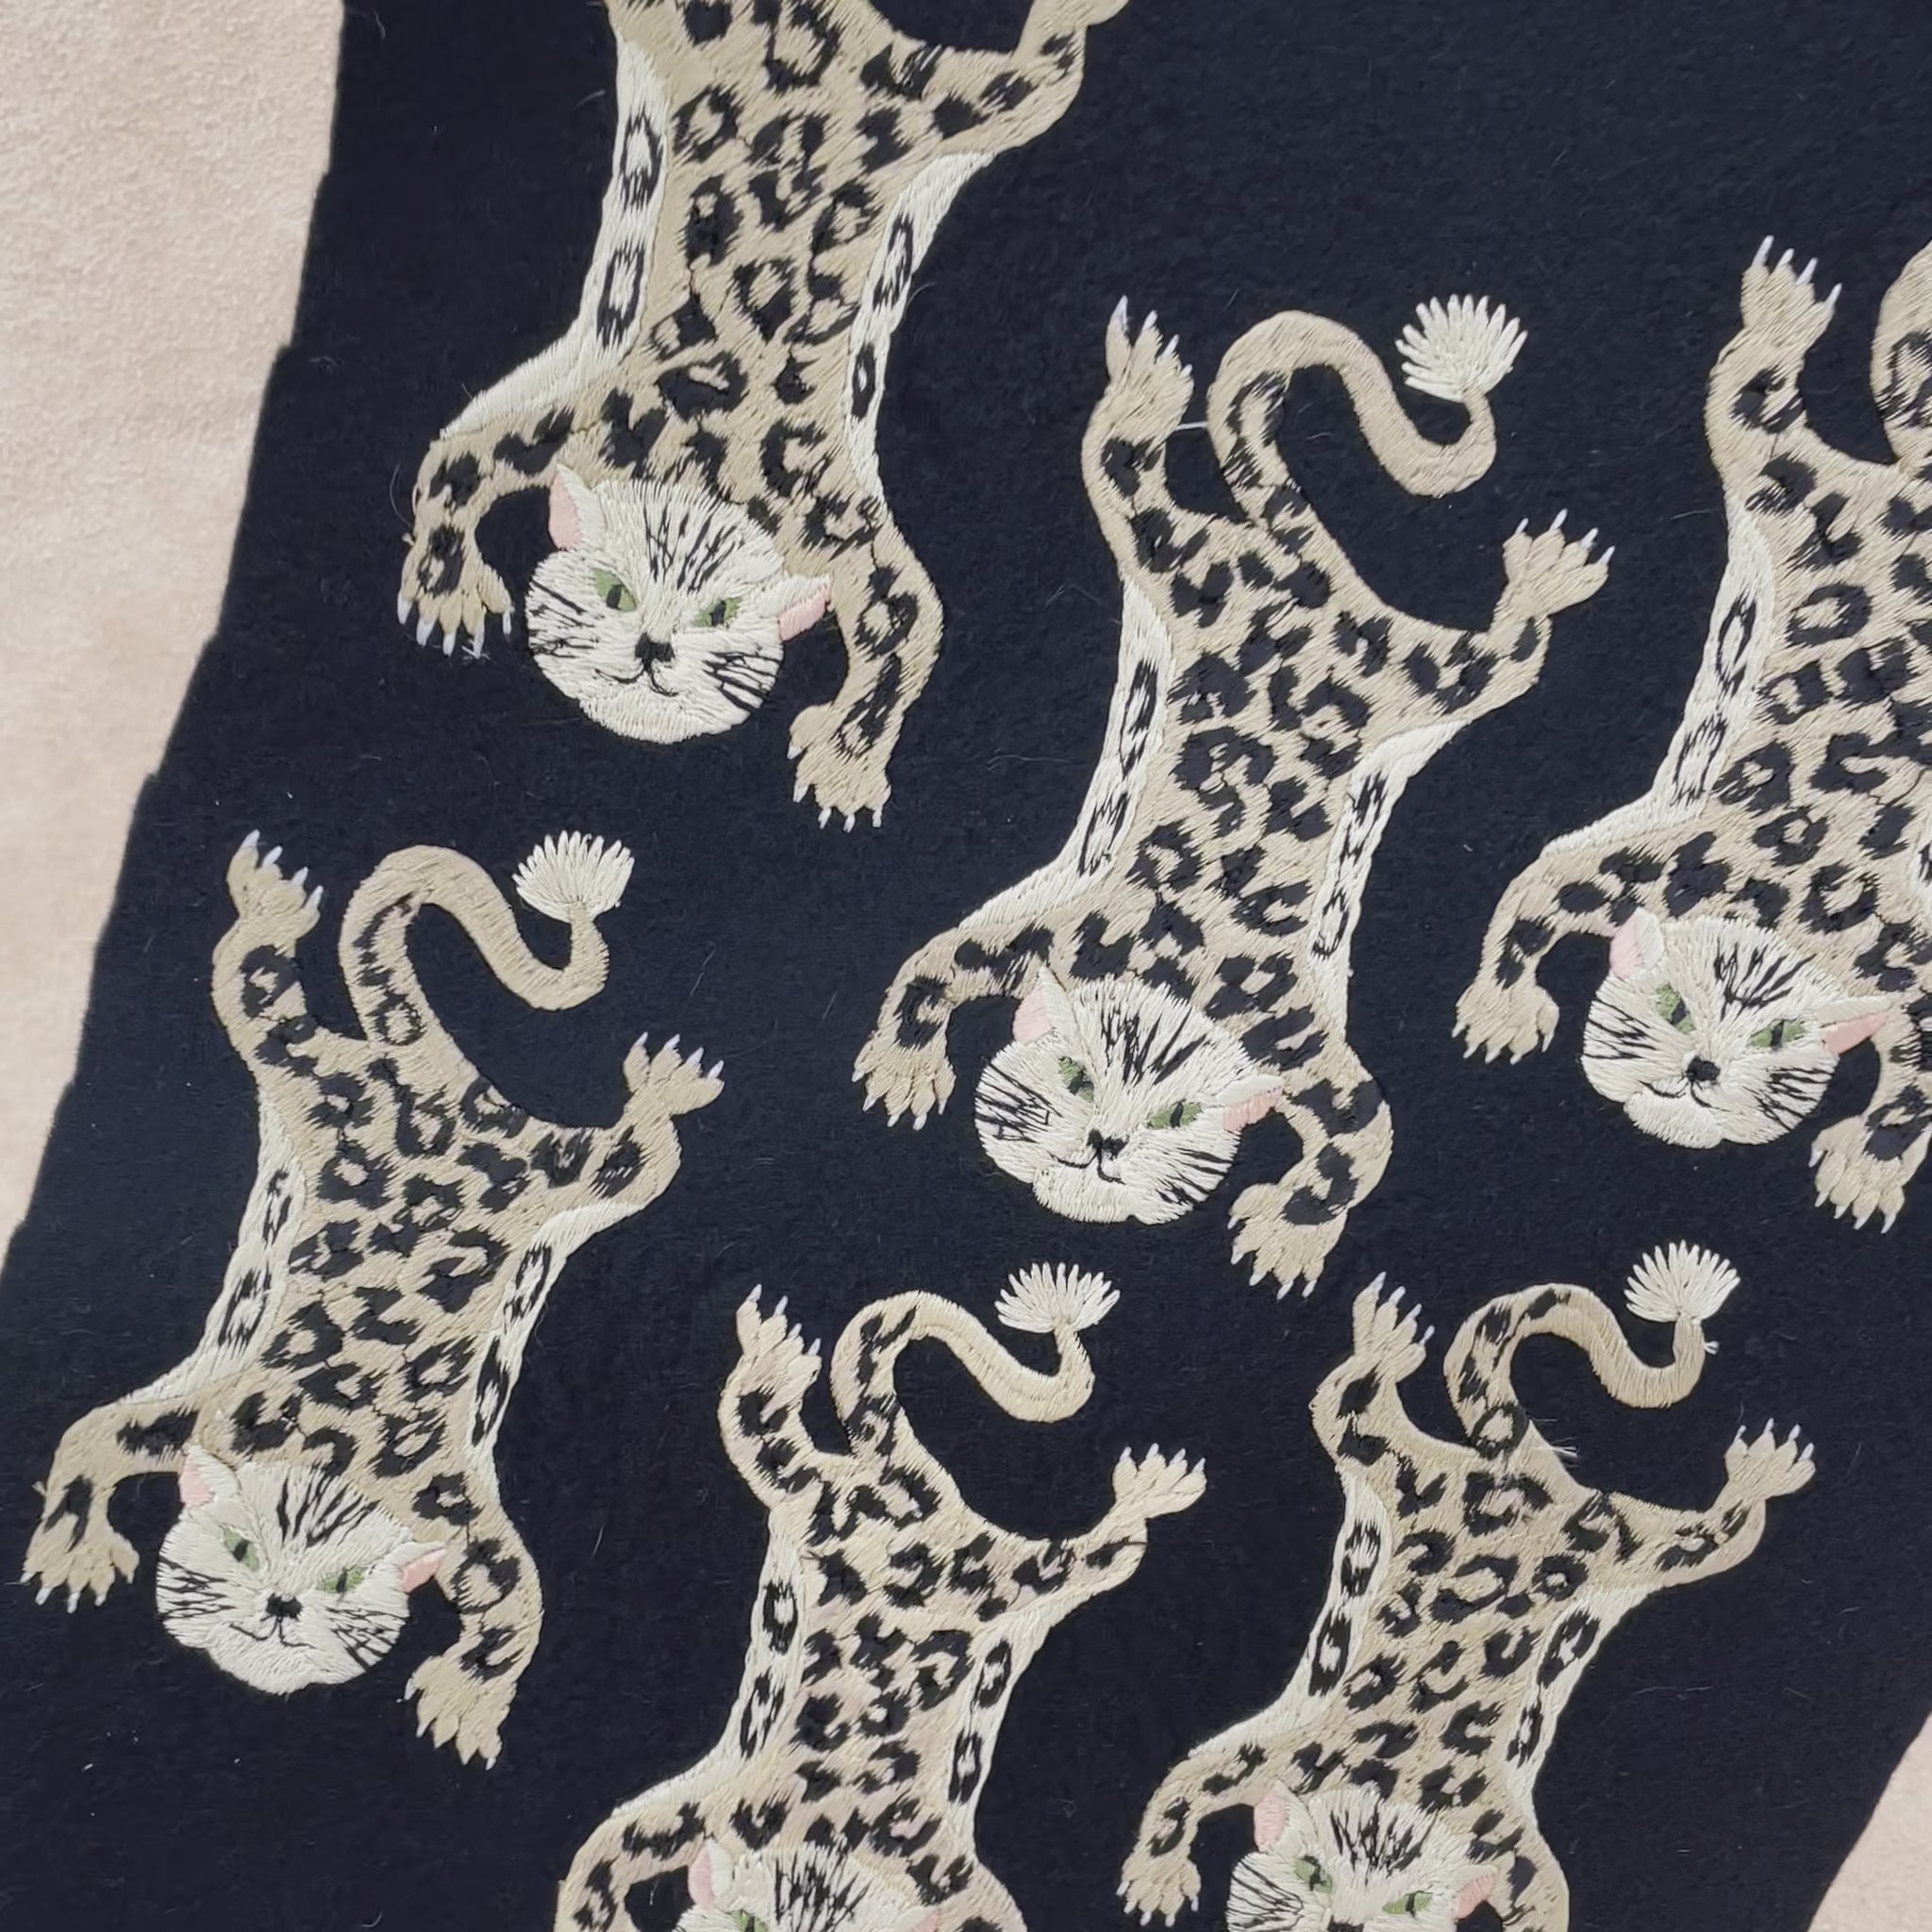 Leopard embroidered patches shown before being cut-out on black felt